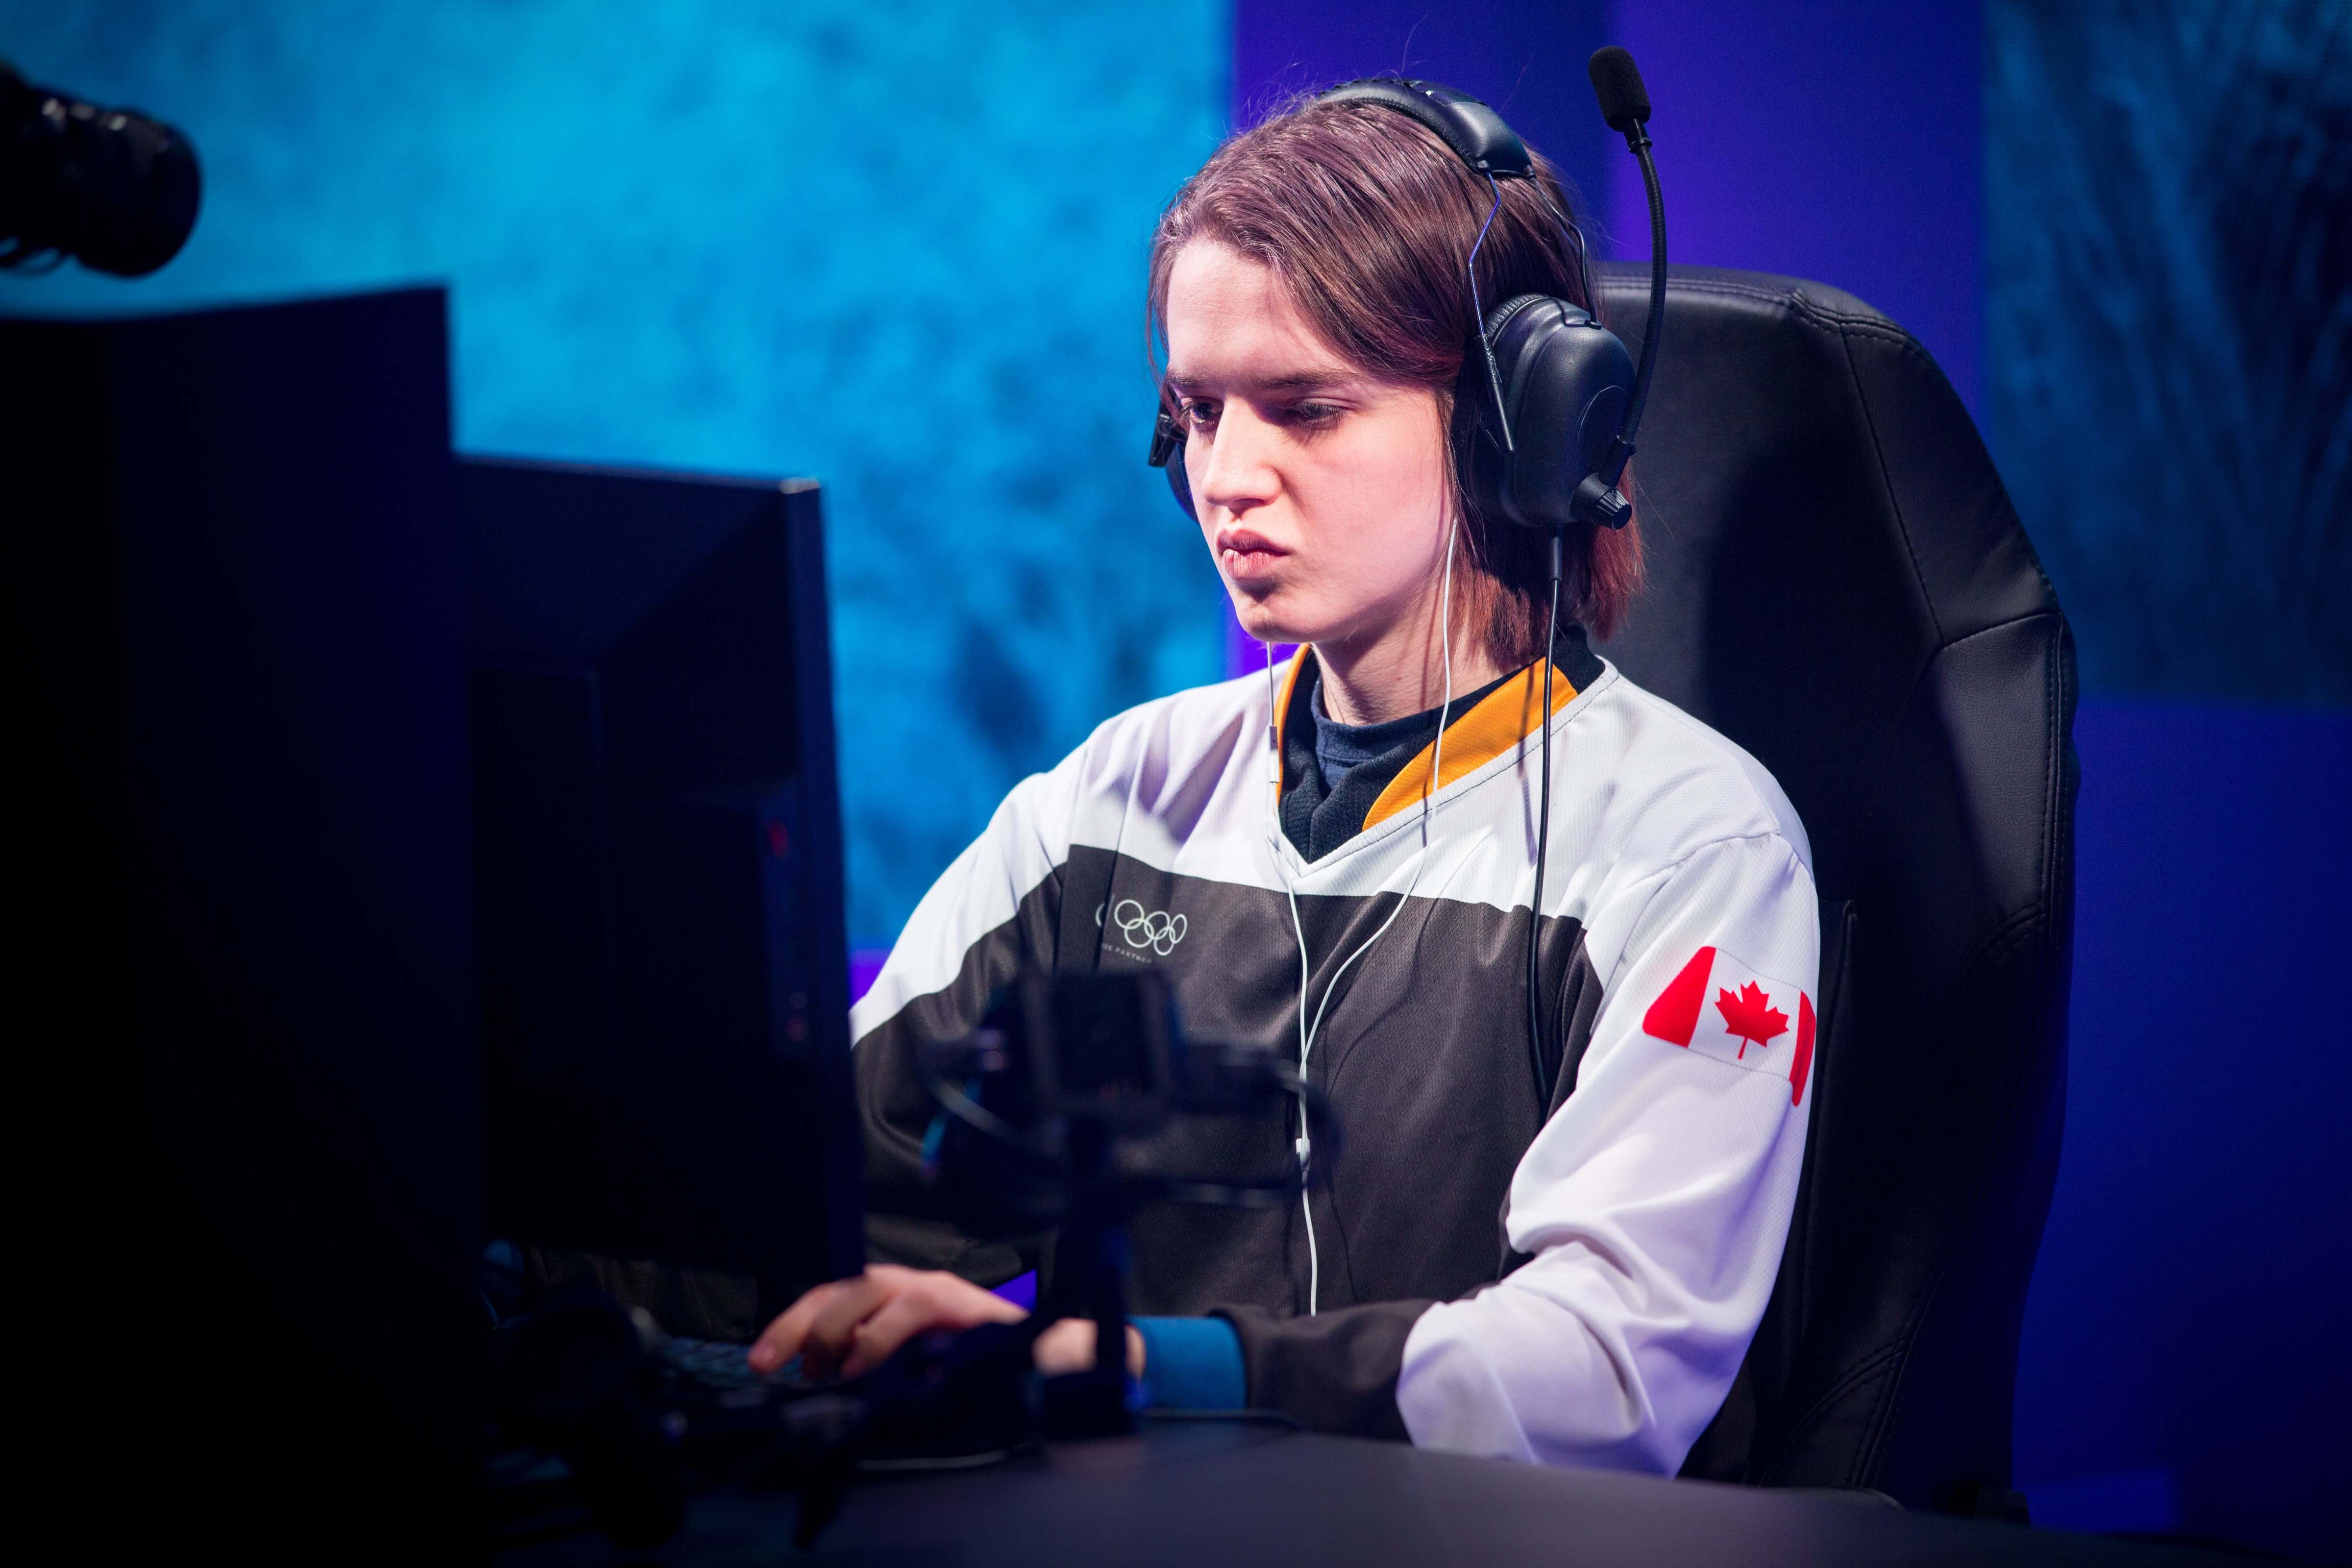 Sasha "Scarlett" Hostyn of Canada competes in the Intel Extreme Masters e-sports tournament in Gangneung, South Korea on February 7, 2018. (Intel/ESL)